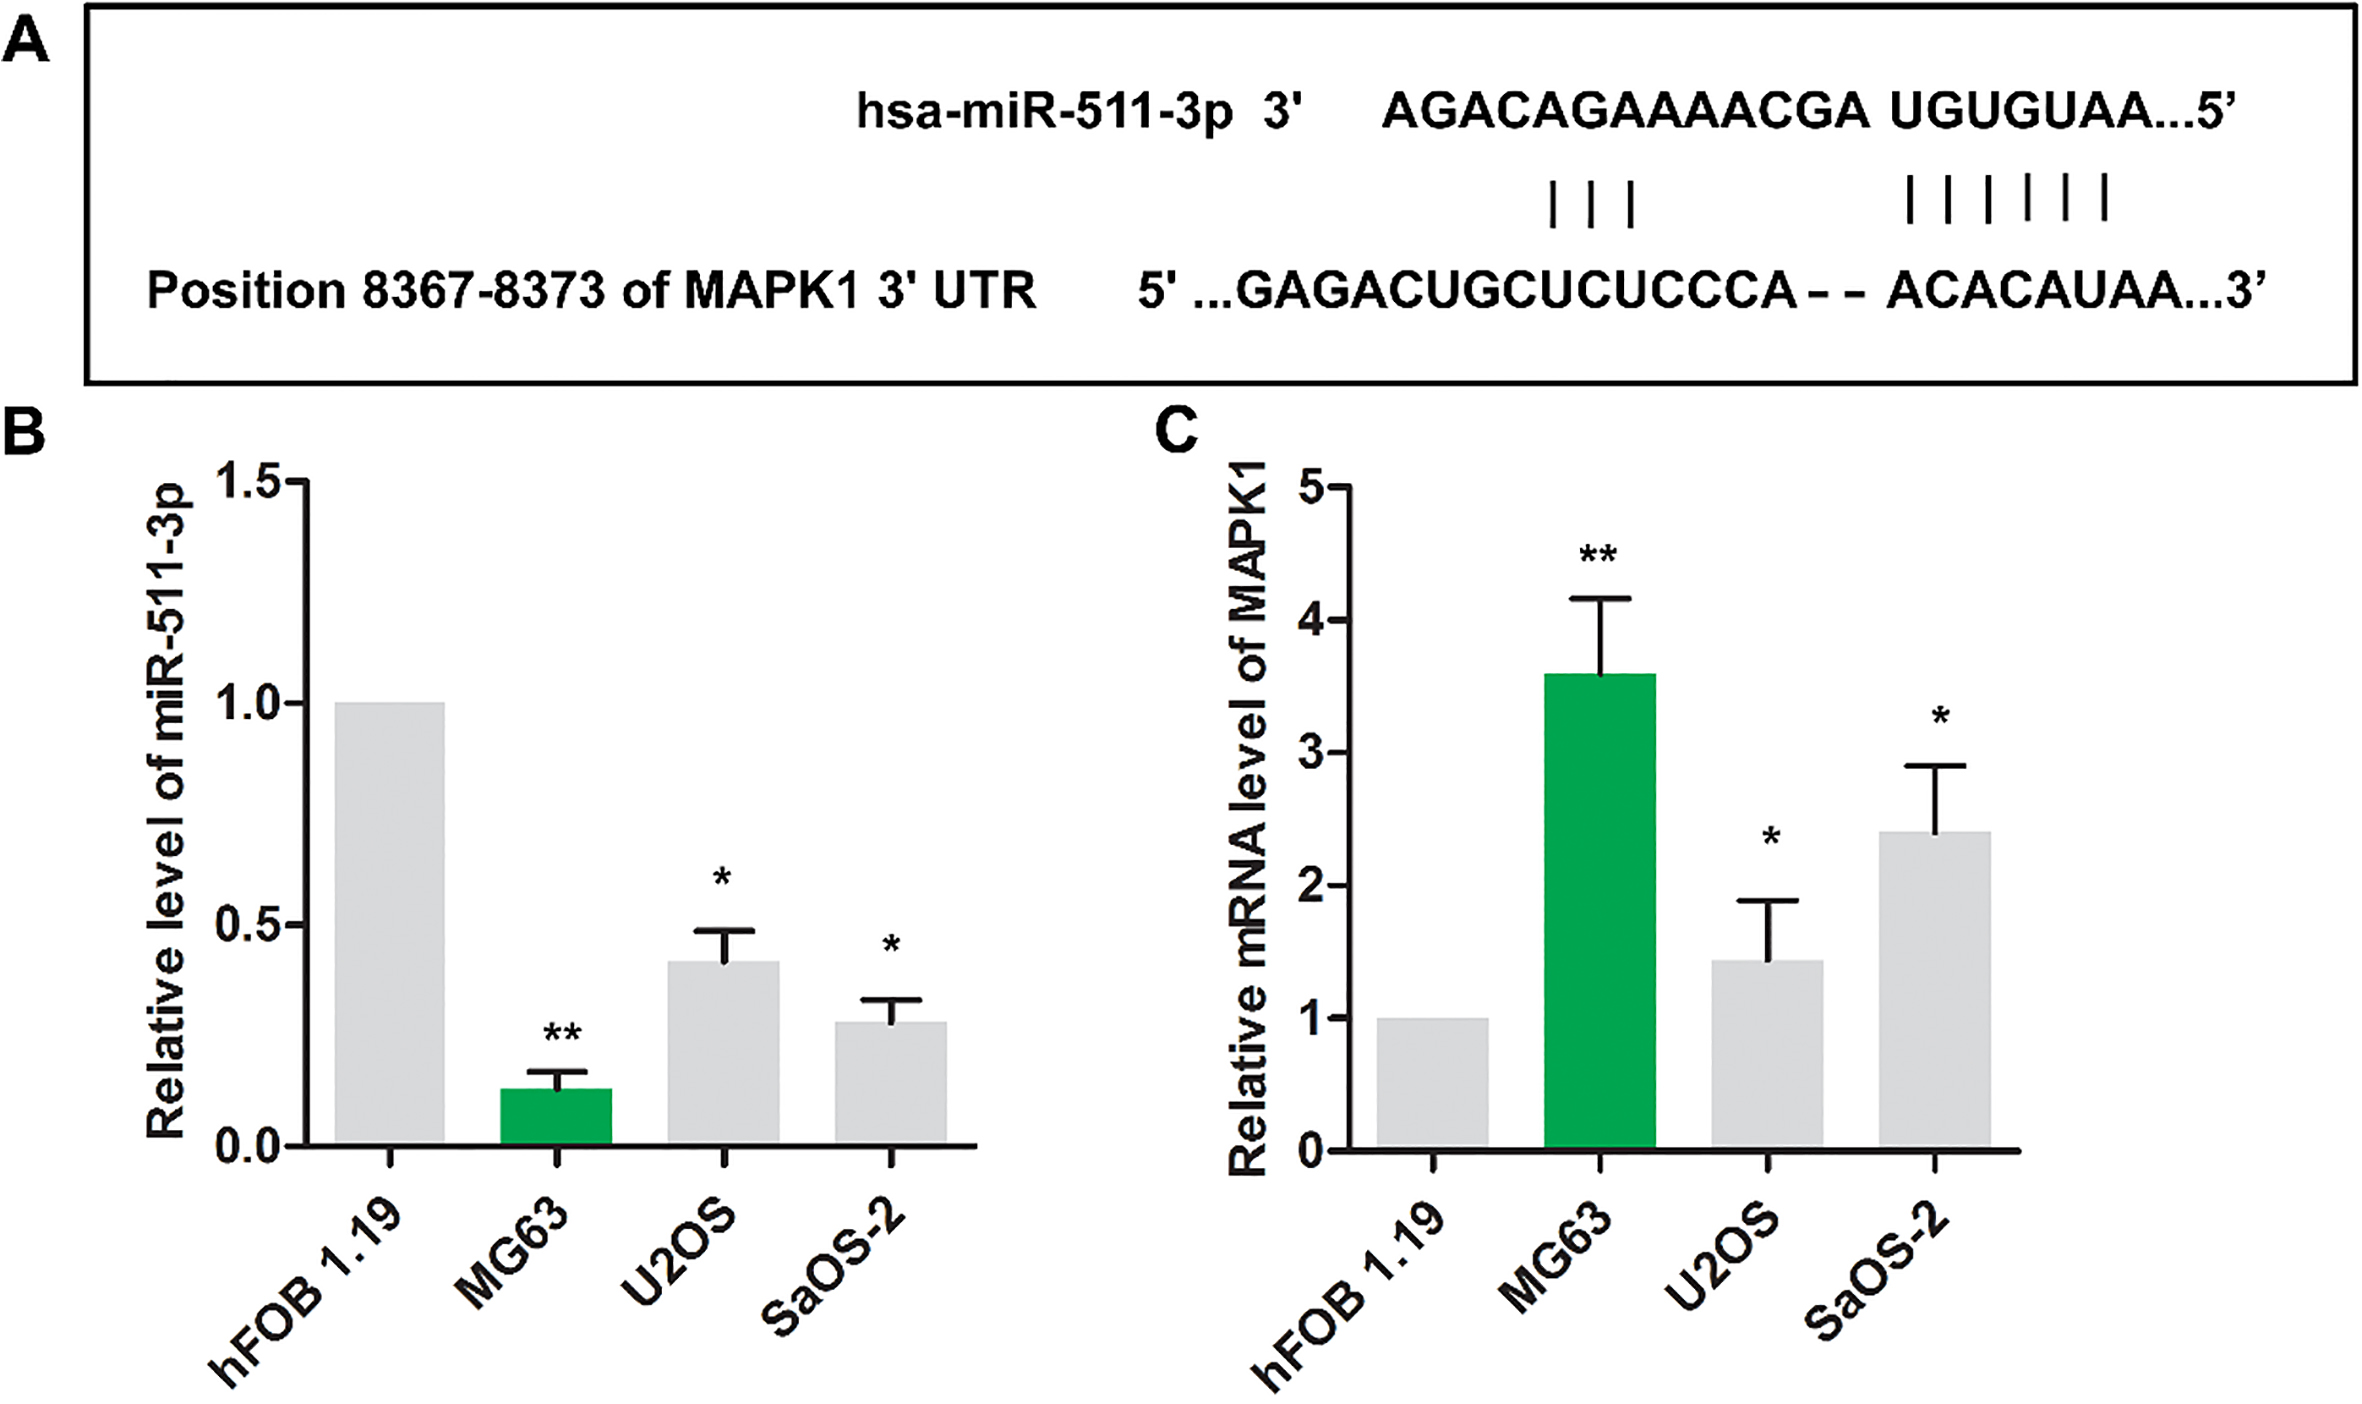 The expression of miR-511 and MAPK1 were dysregulated in osteosarcoma cells. (A) The binding sites between miR-511 and MAPK1 were predicted via Targetscan website. The relative expressions miR-511(B) and MAPK1(C) were detected using RT-PCR in HFOB1.19, MG63, Saos2 and U2OS cell lines. β-actin was used as internal control. The experiments were repeated at least 3 times, and error bars represent ± SD (P∗∗< 0.01, P∗< 0.05 versus HFOB1.19 group).